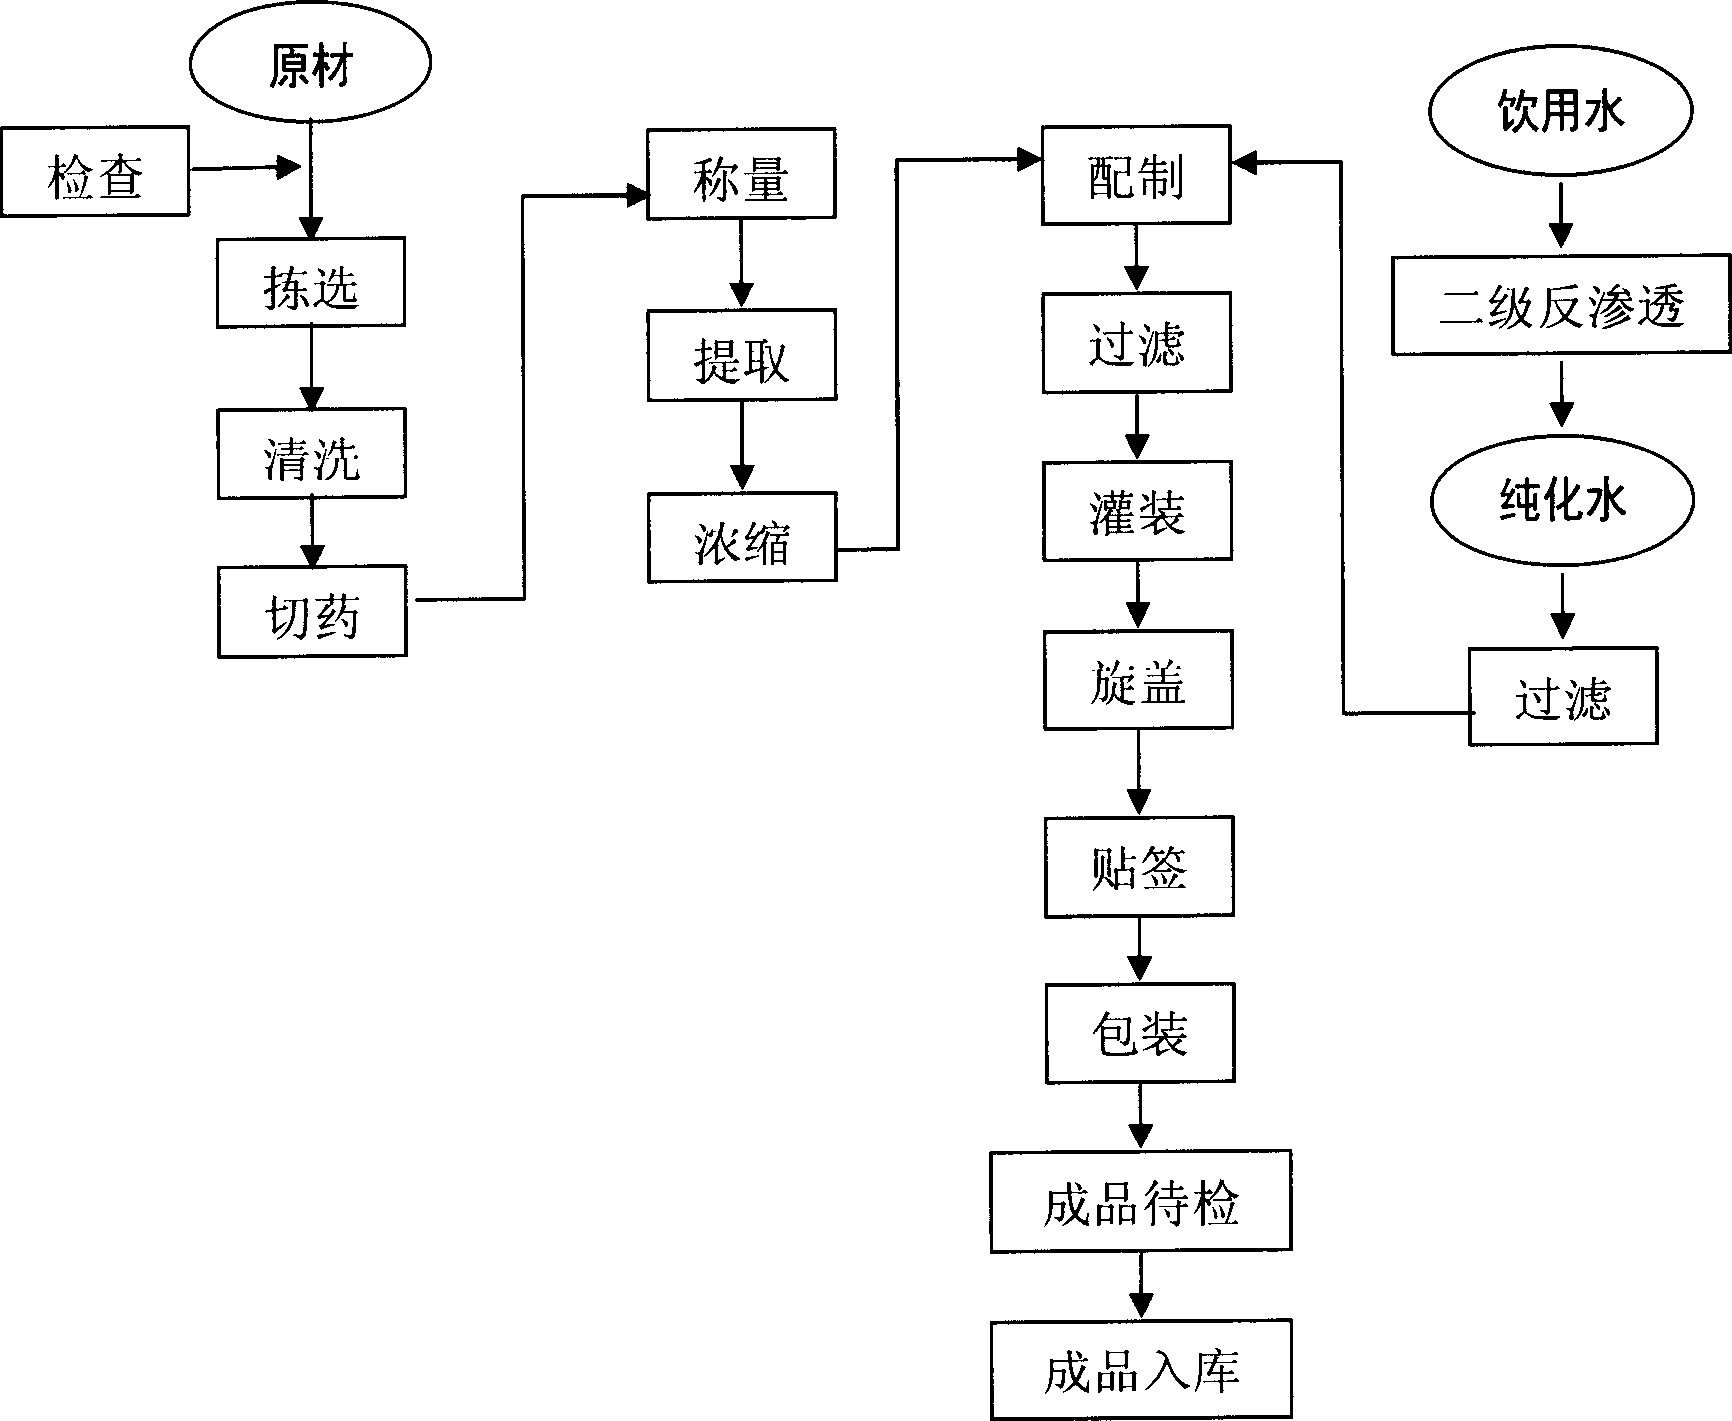 Compound plant extract for preventing avian influenza and preparation thereof